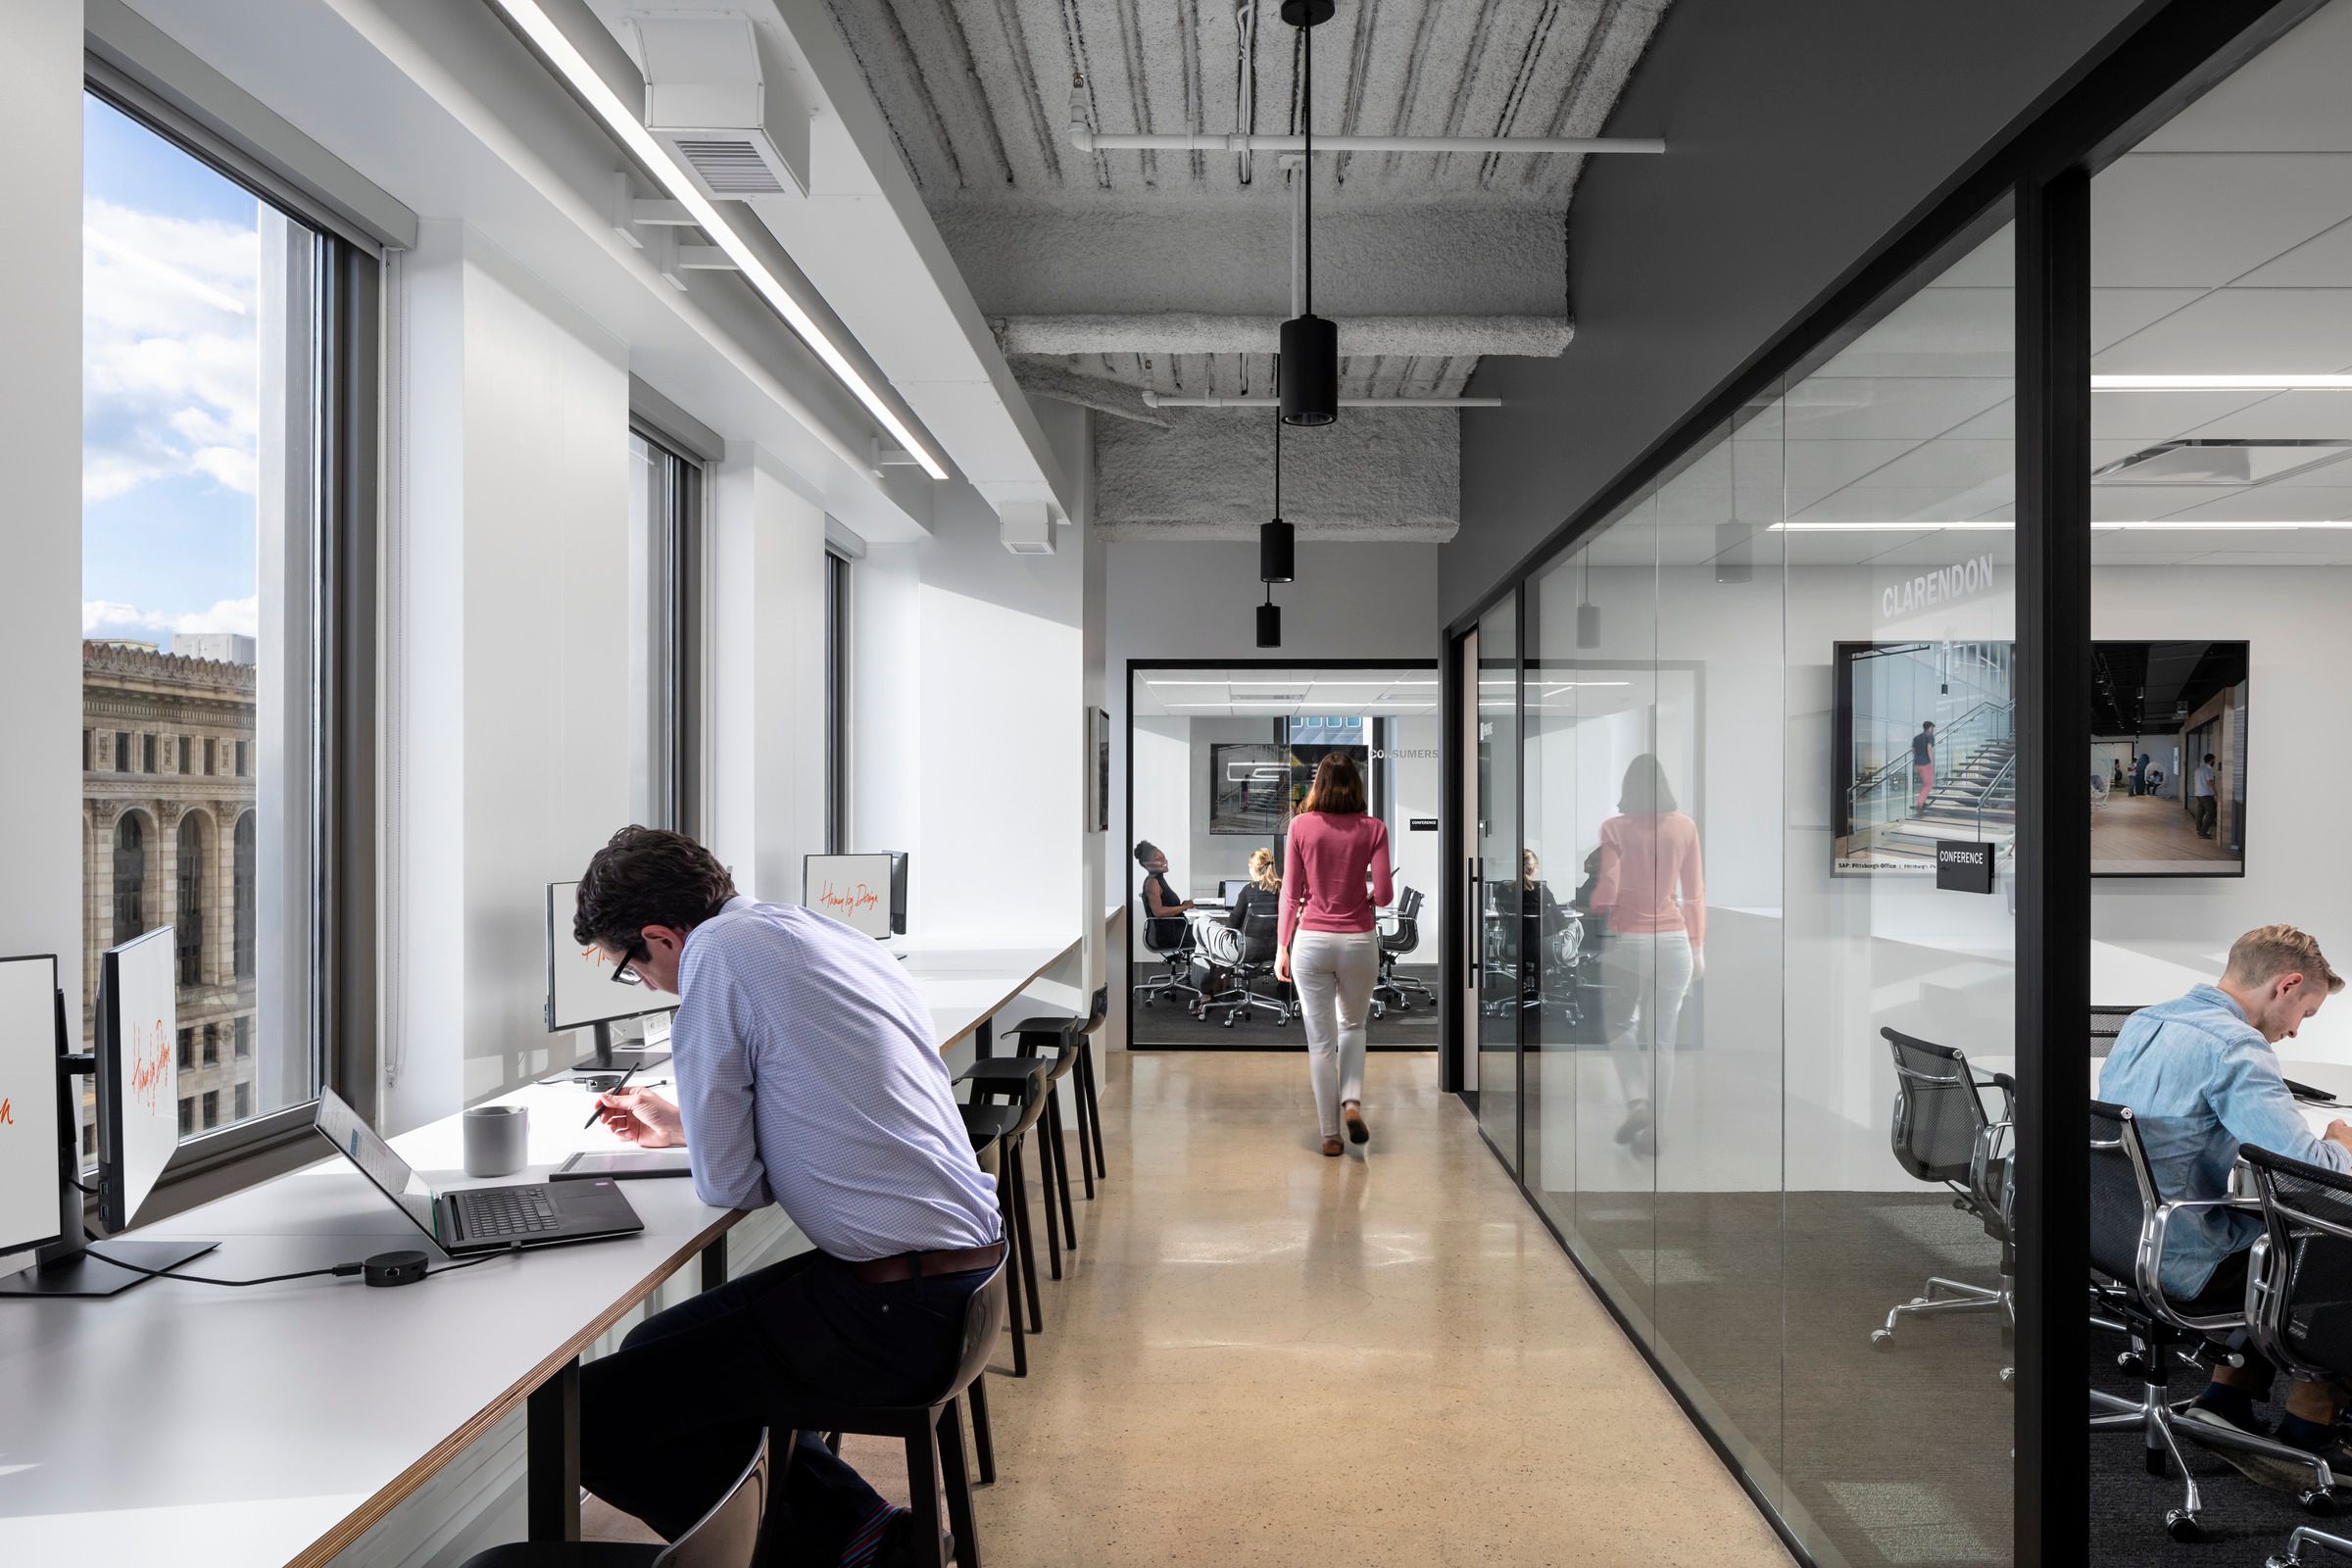 The new studio increased its “we-space,” which includes both meeting rooms and more informal meeting spaces. (Andrew Rugge / Courtesy Perkins Eastman)